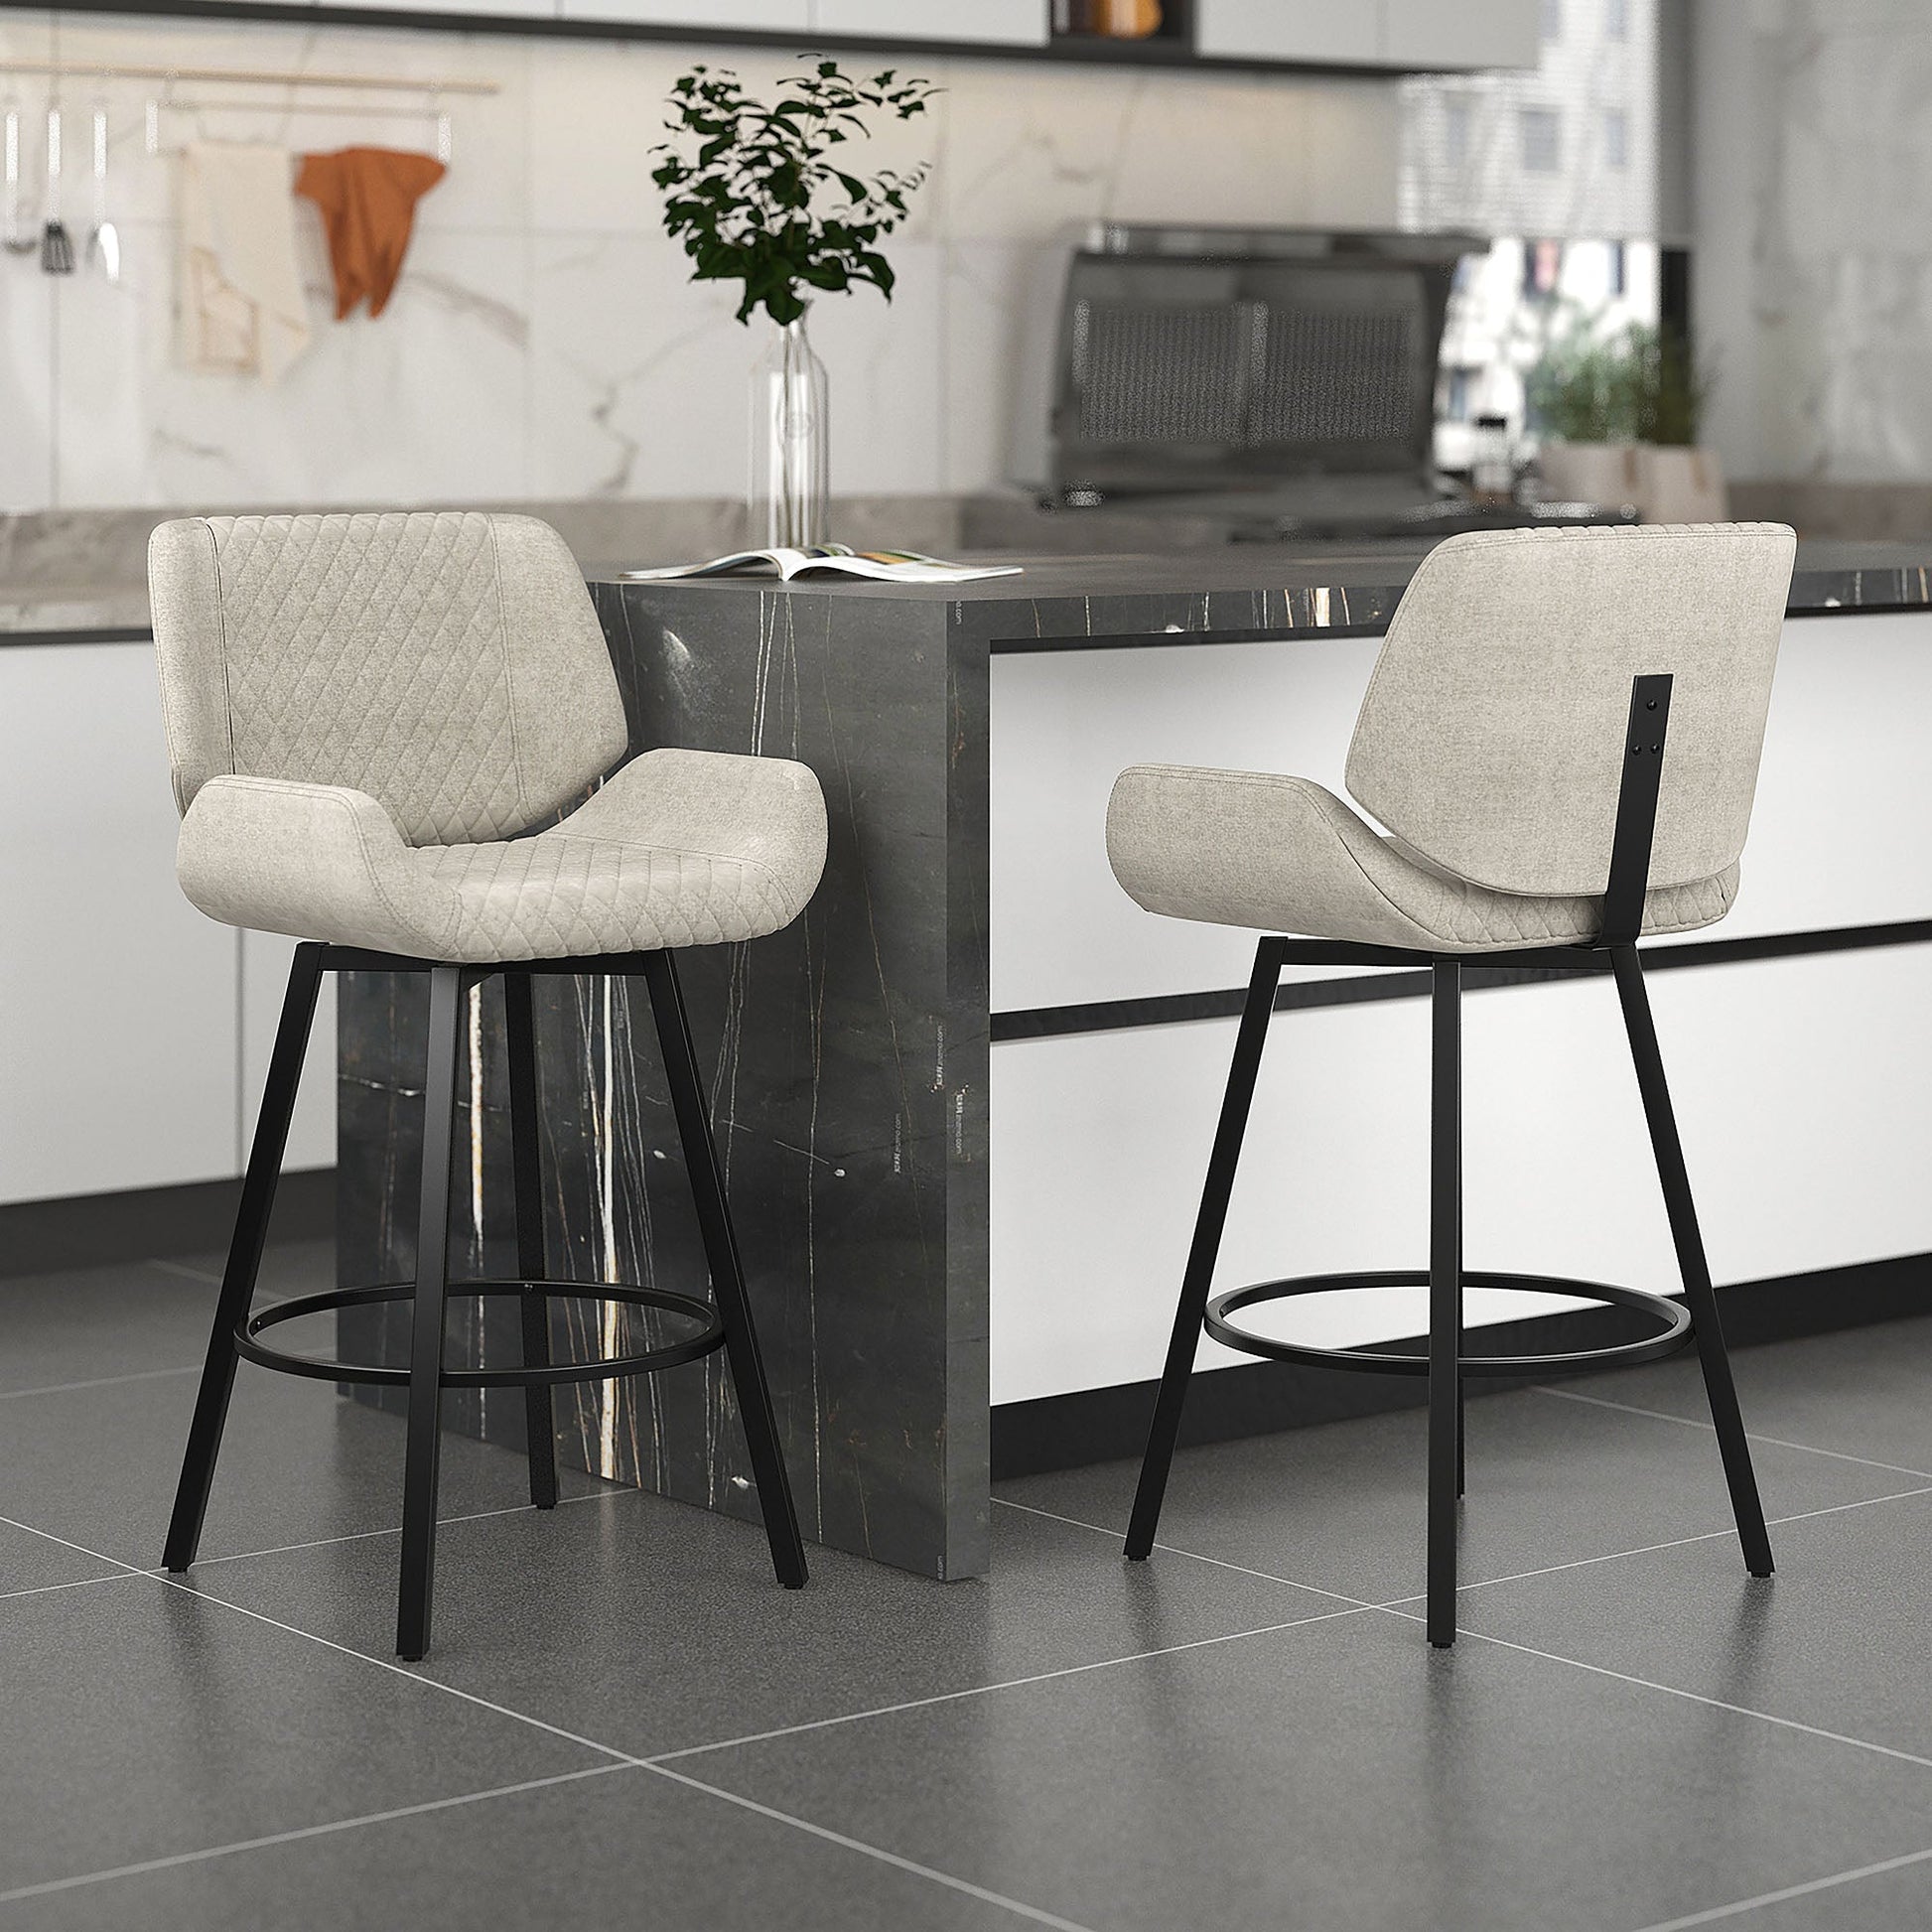 26 inch Bar Stools | Sets of 2 | Fraser Grey and Black - Your Bar Stools Canada